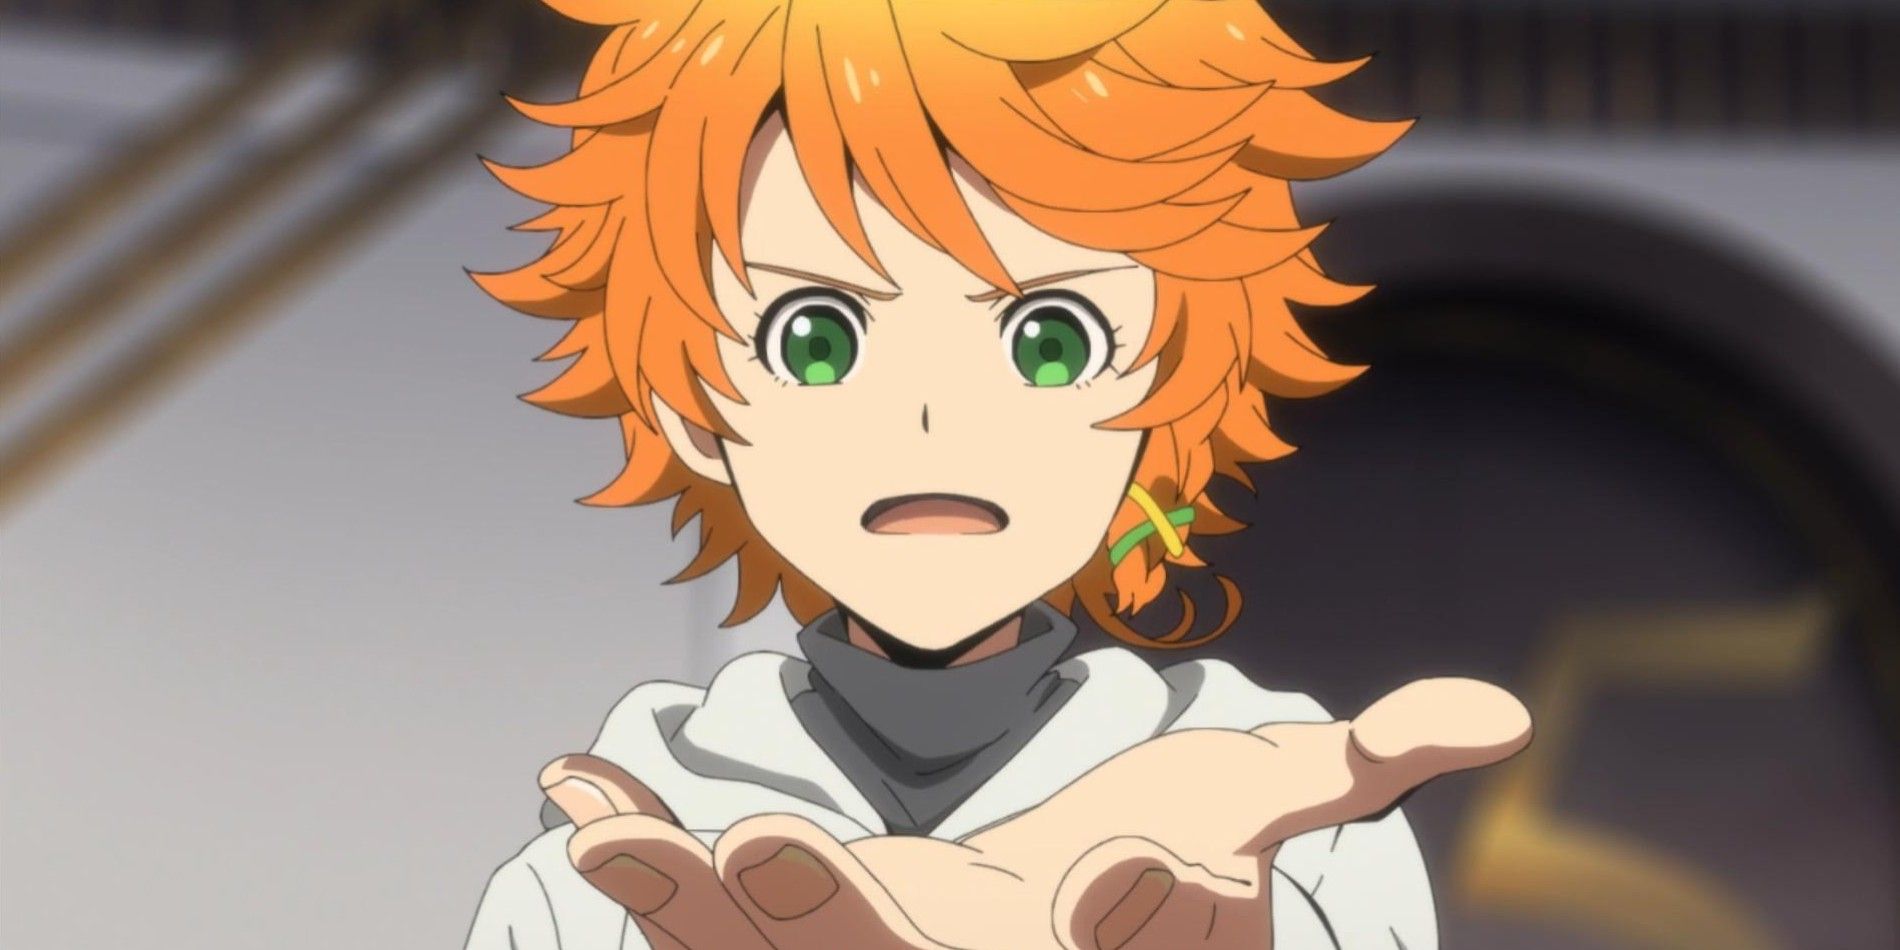 The Promised Neverland central character holding out a hand